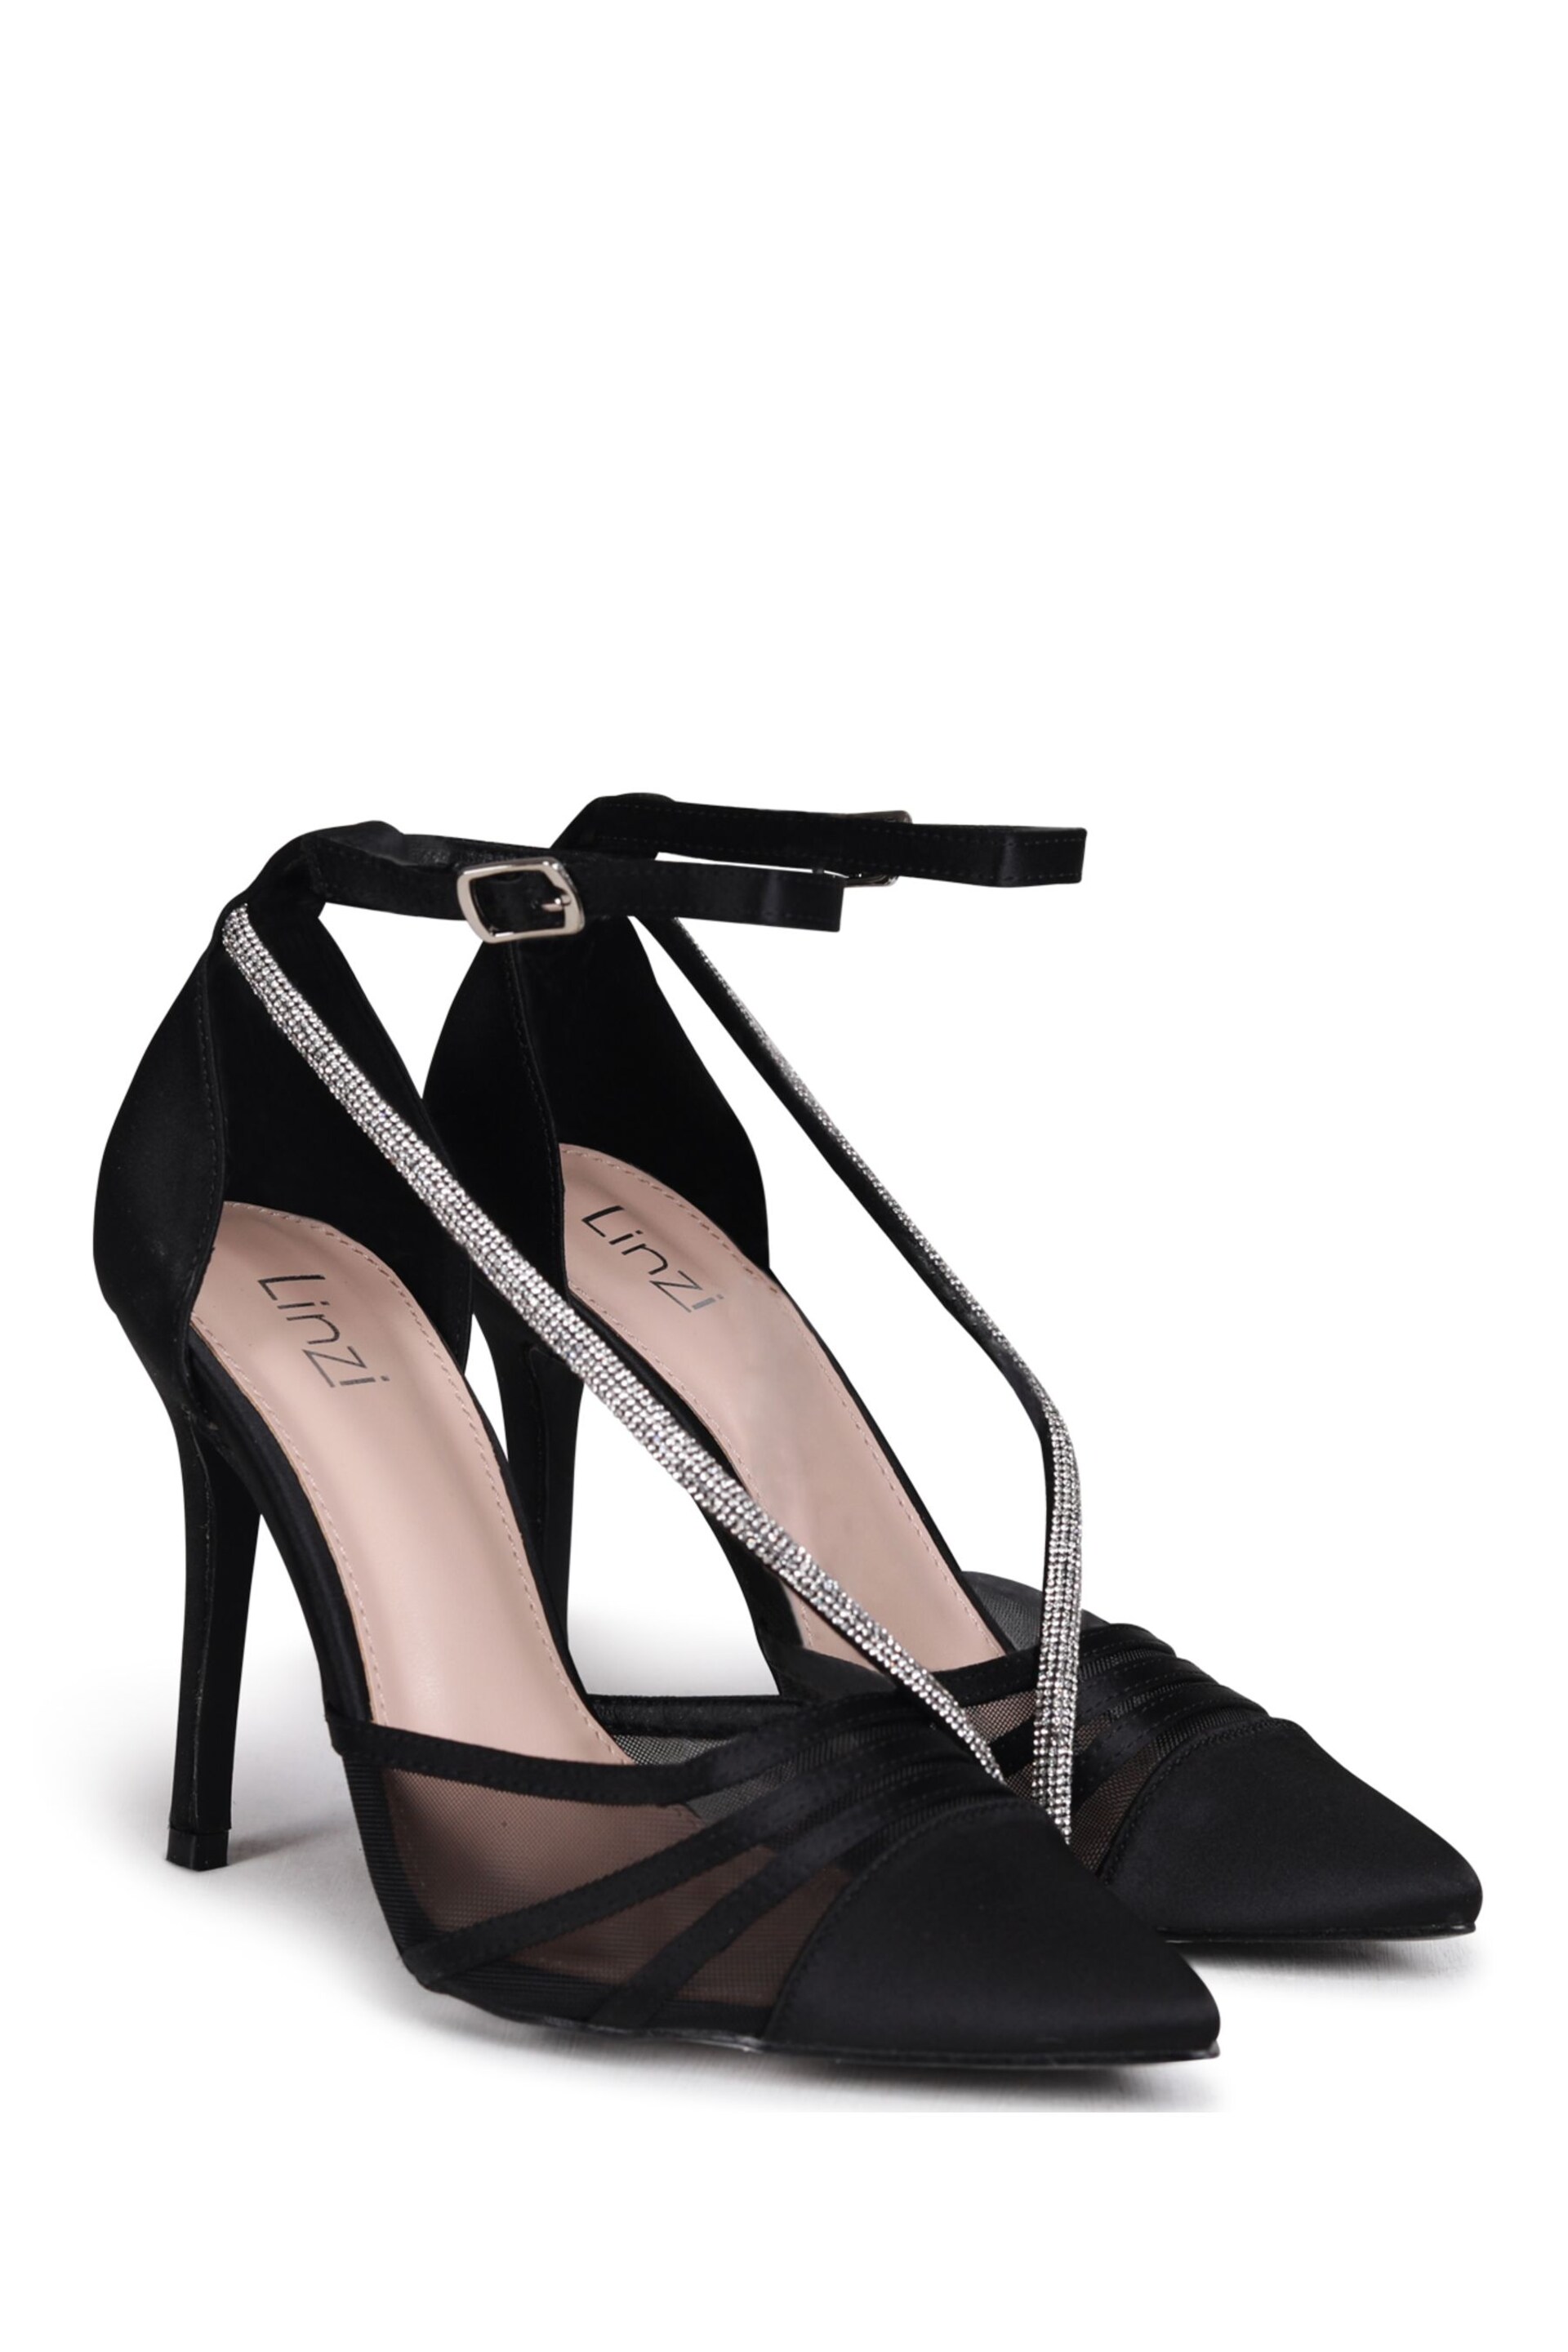 Linzi Black Gretchen Satin & Mesh Court Heels With Diamante Wrap Over Front Strap - Image 3 of 4